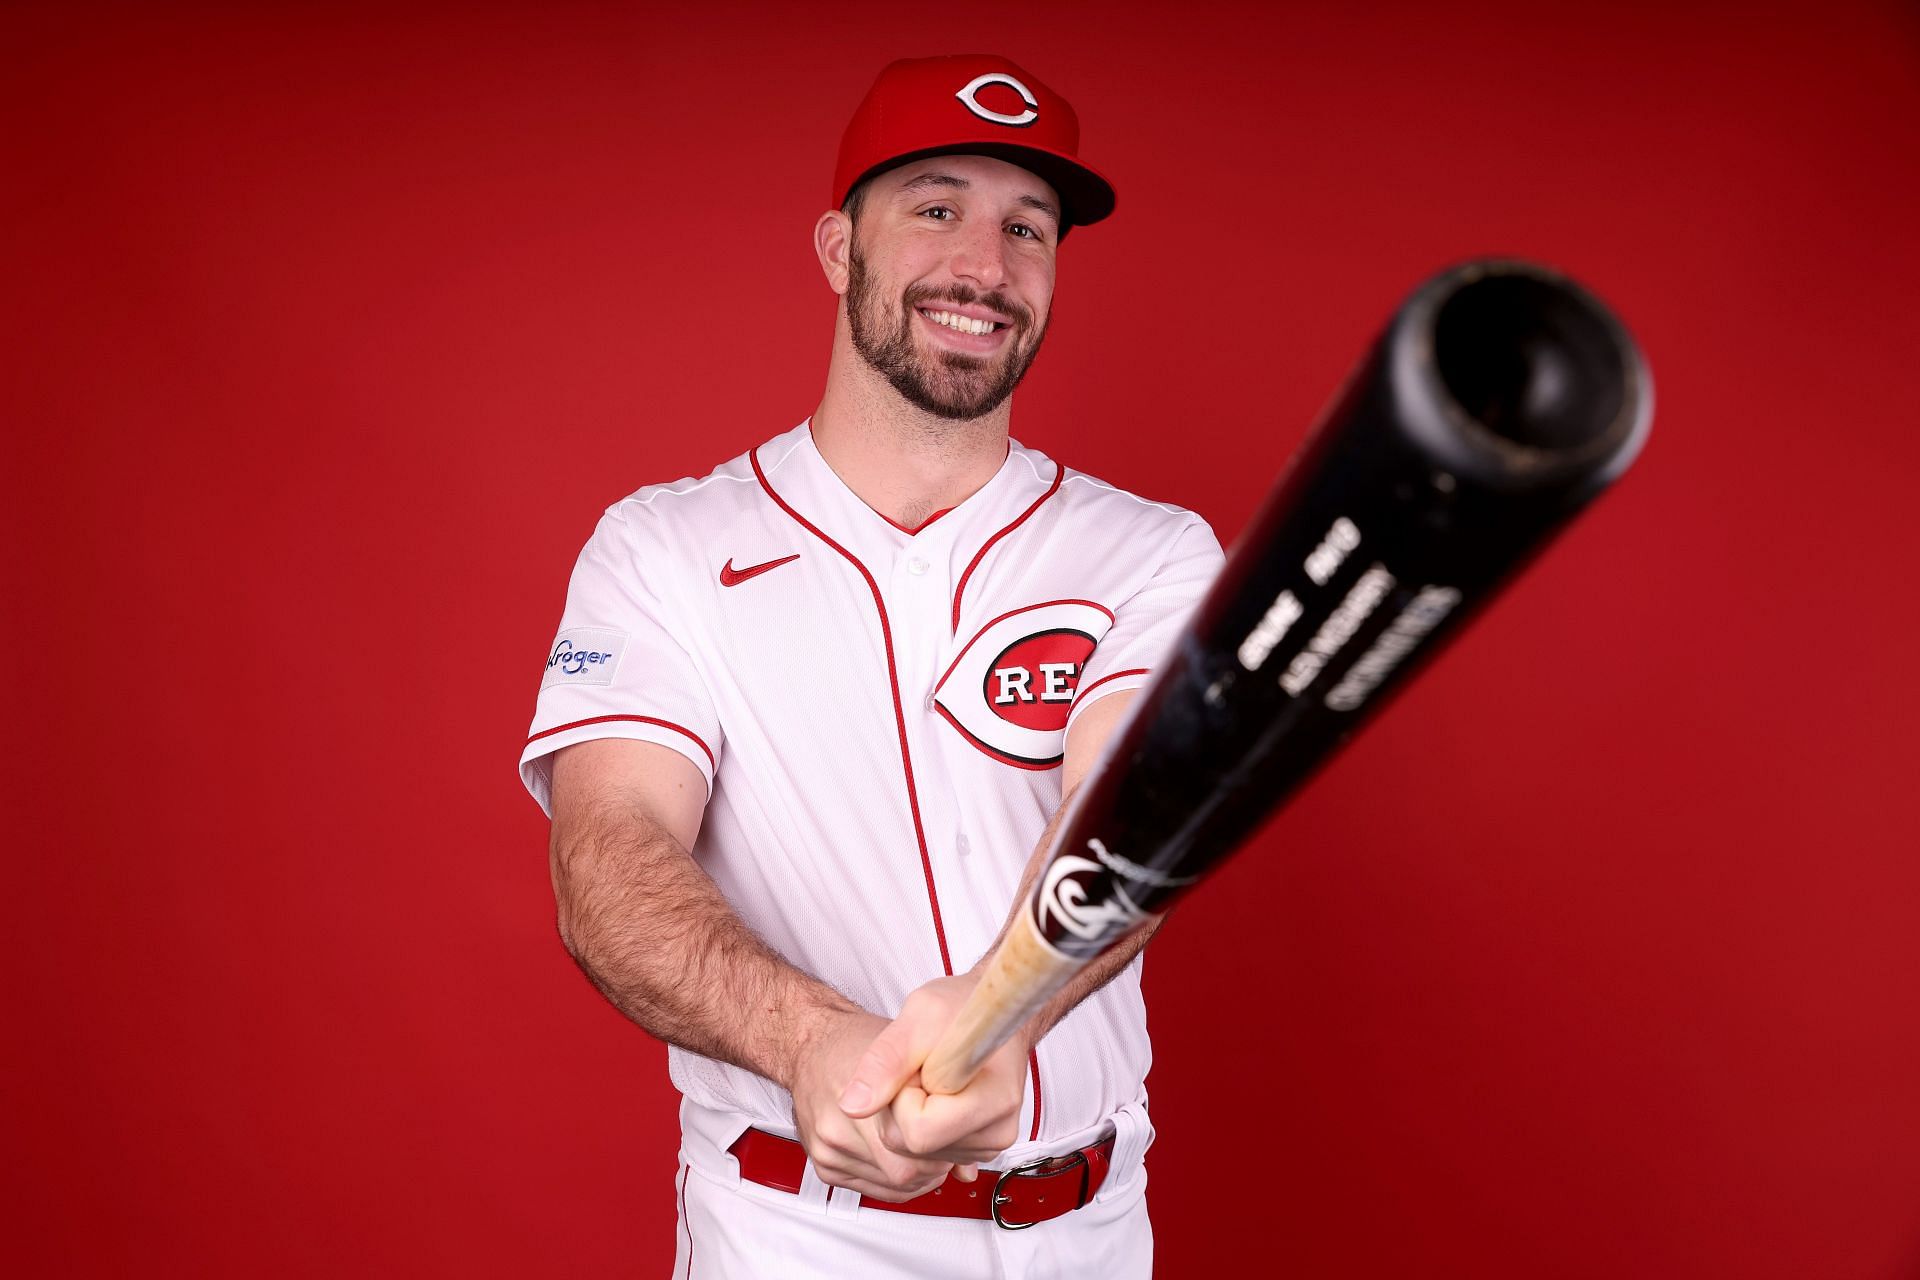 The Kroger patch on jerseys look terrible, change my mind. : r/Reds